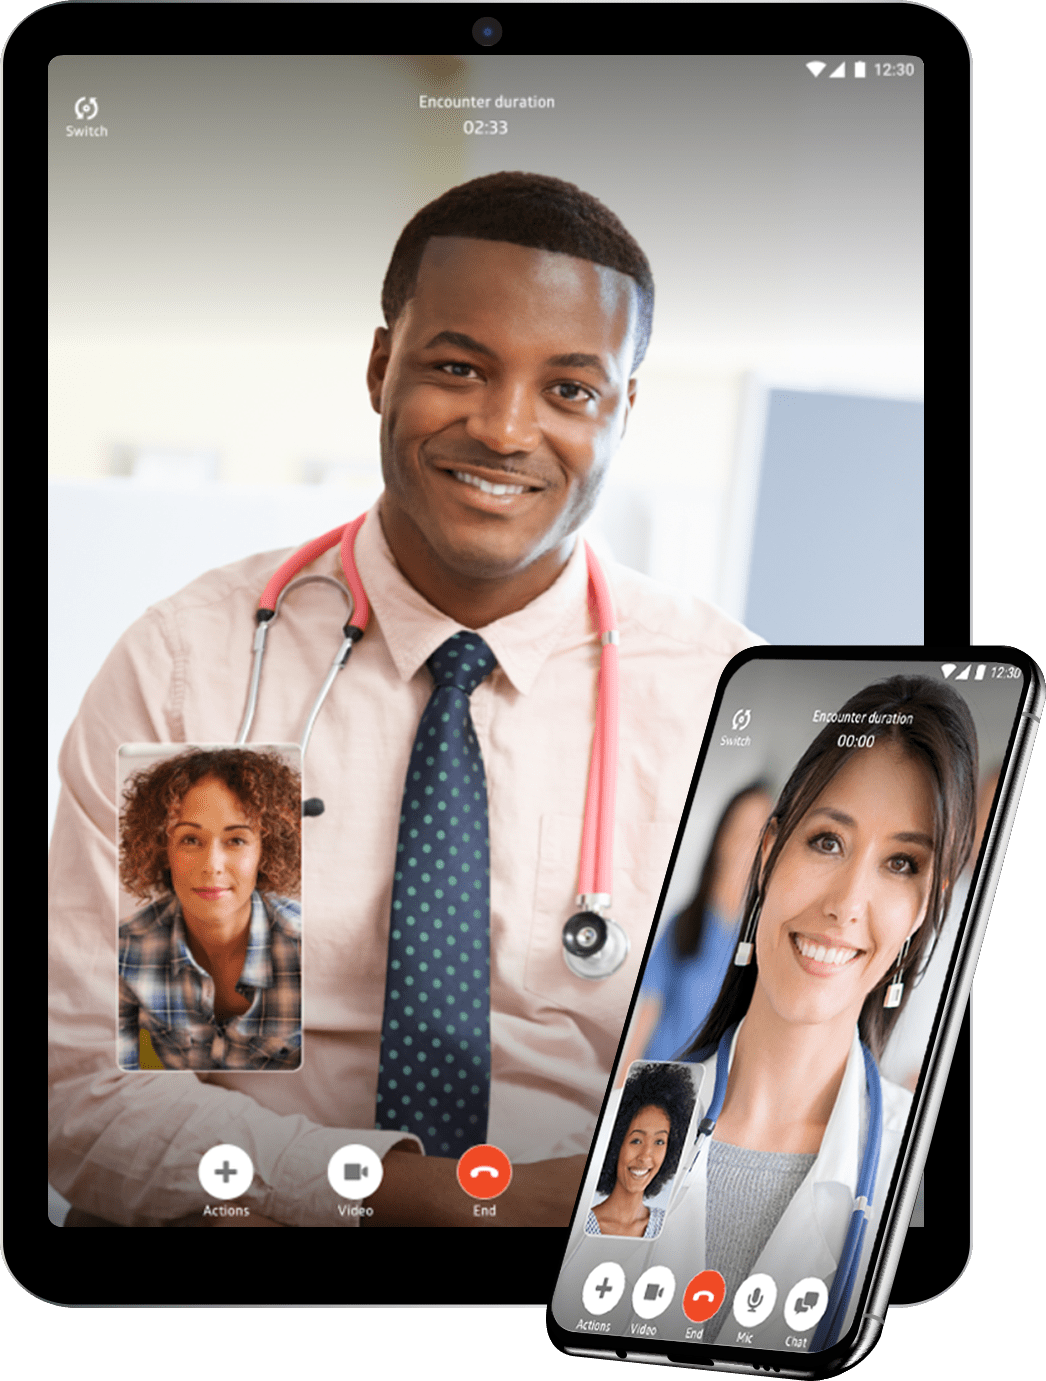 Image of a table and a phone showing male and female doctors during a virtual consultation call.